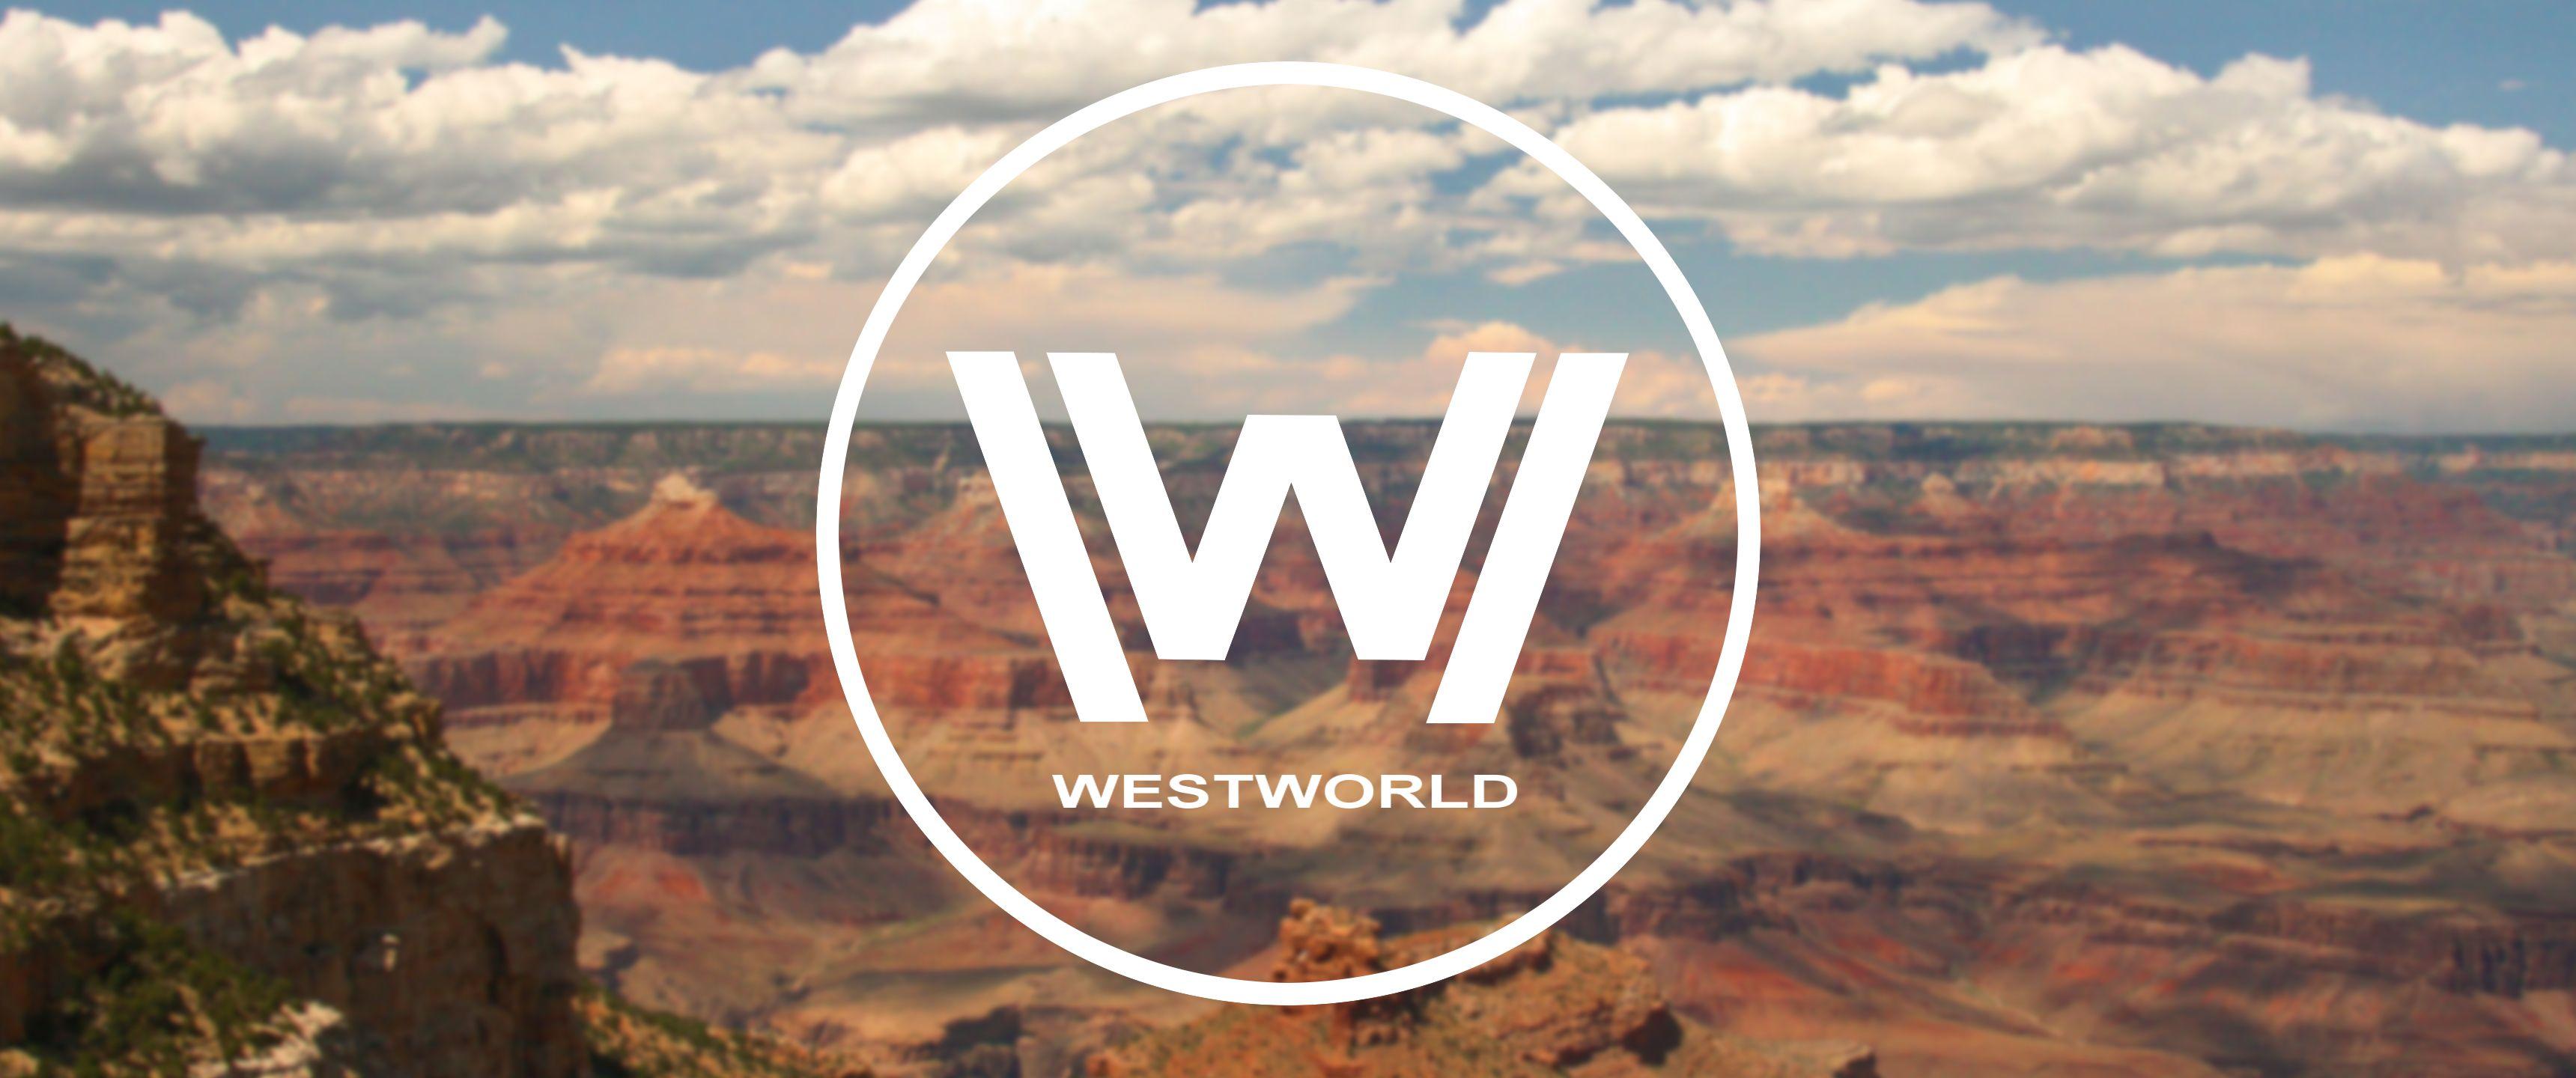 Haven't seen a Westworld wallpaper for ultrawides. Made a simple